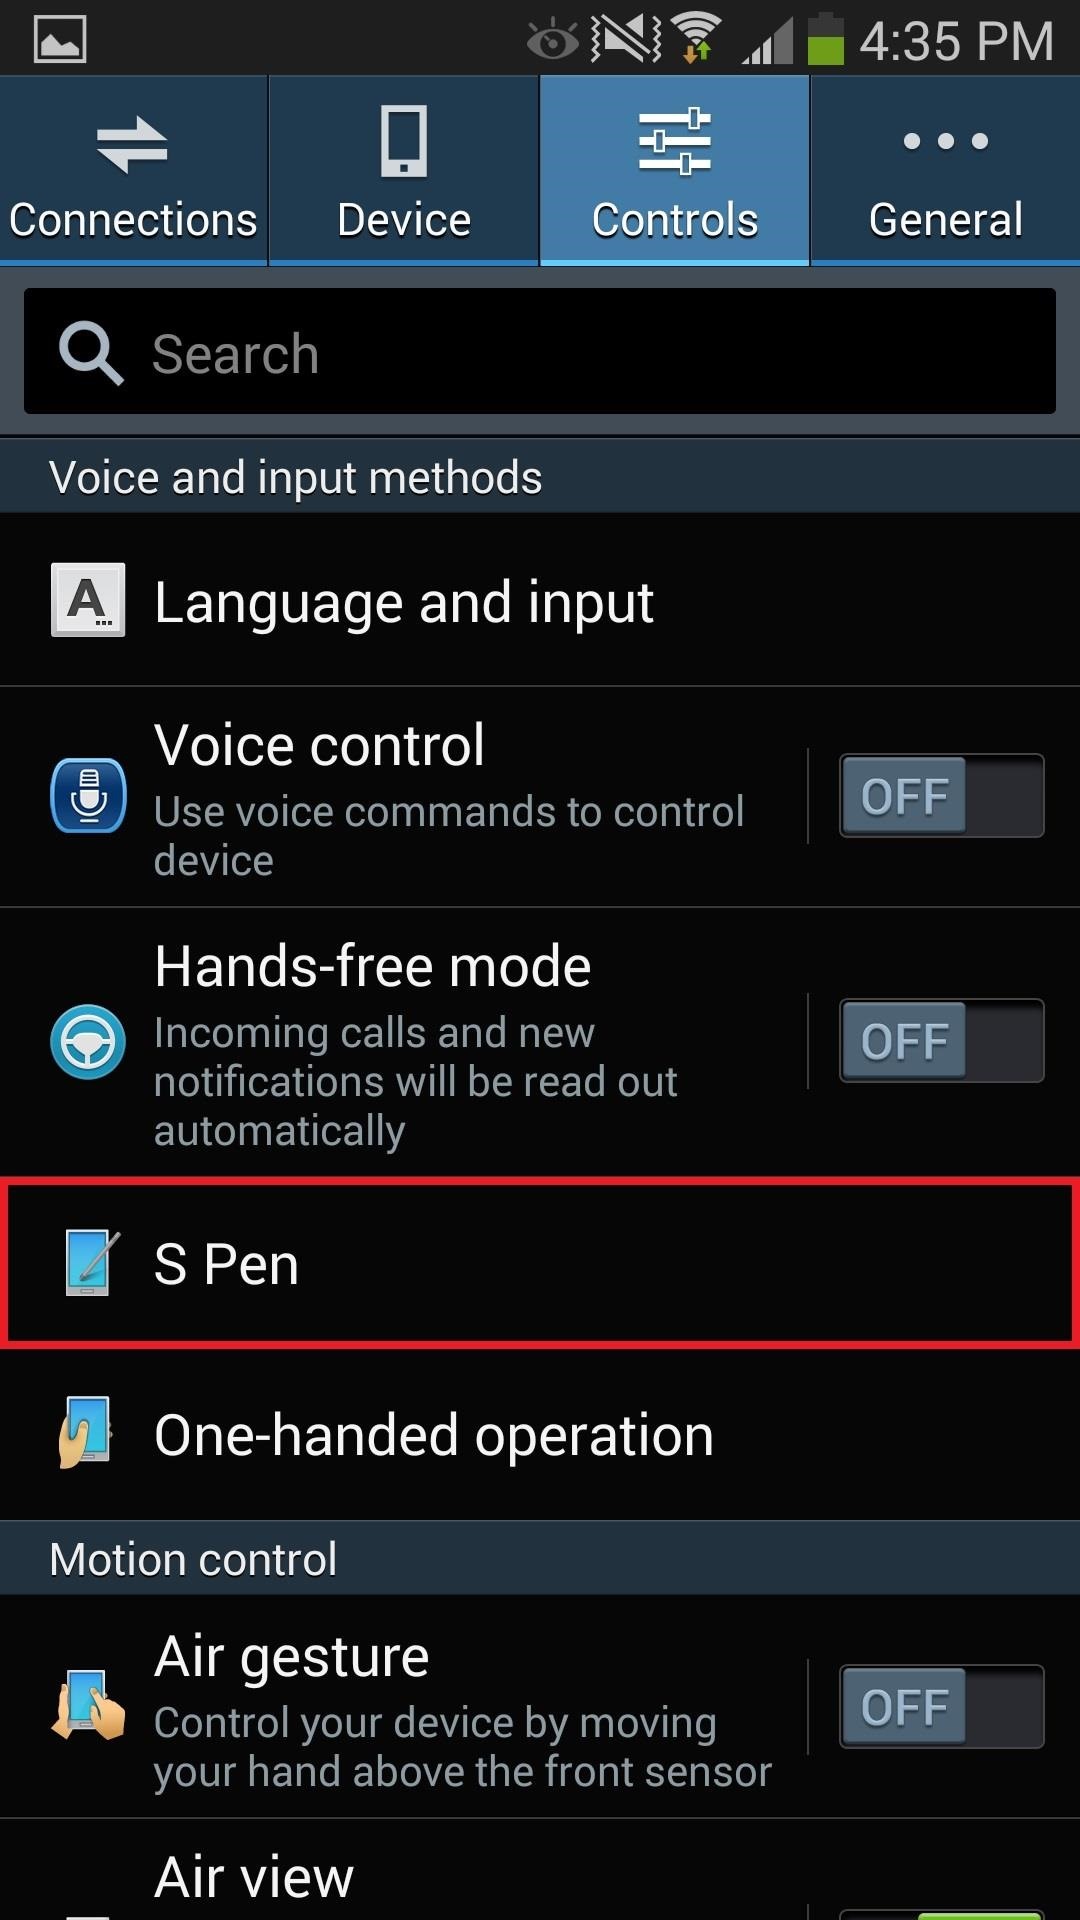 Never Lose a Stylus Again by Setting "Missing S Pen" Alerts on Your Samsung Galaxy Note 2 or Note 3